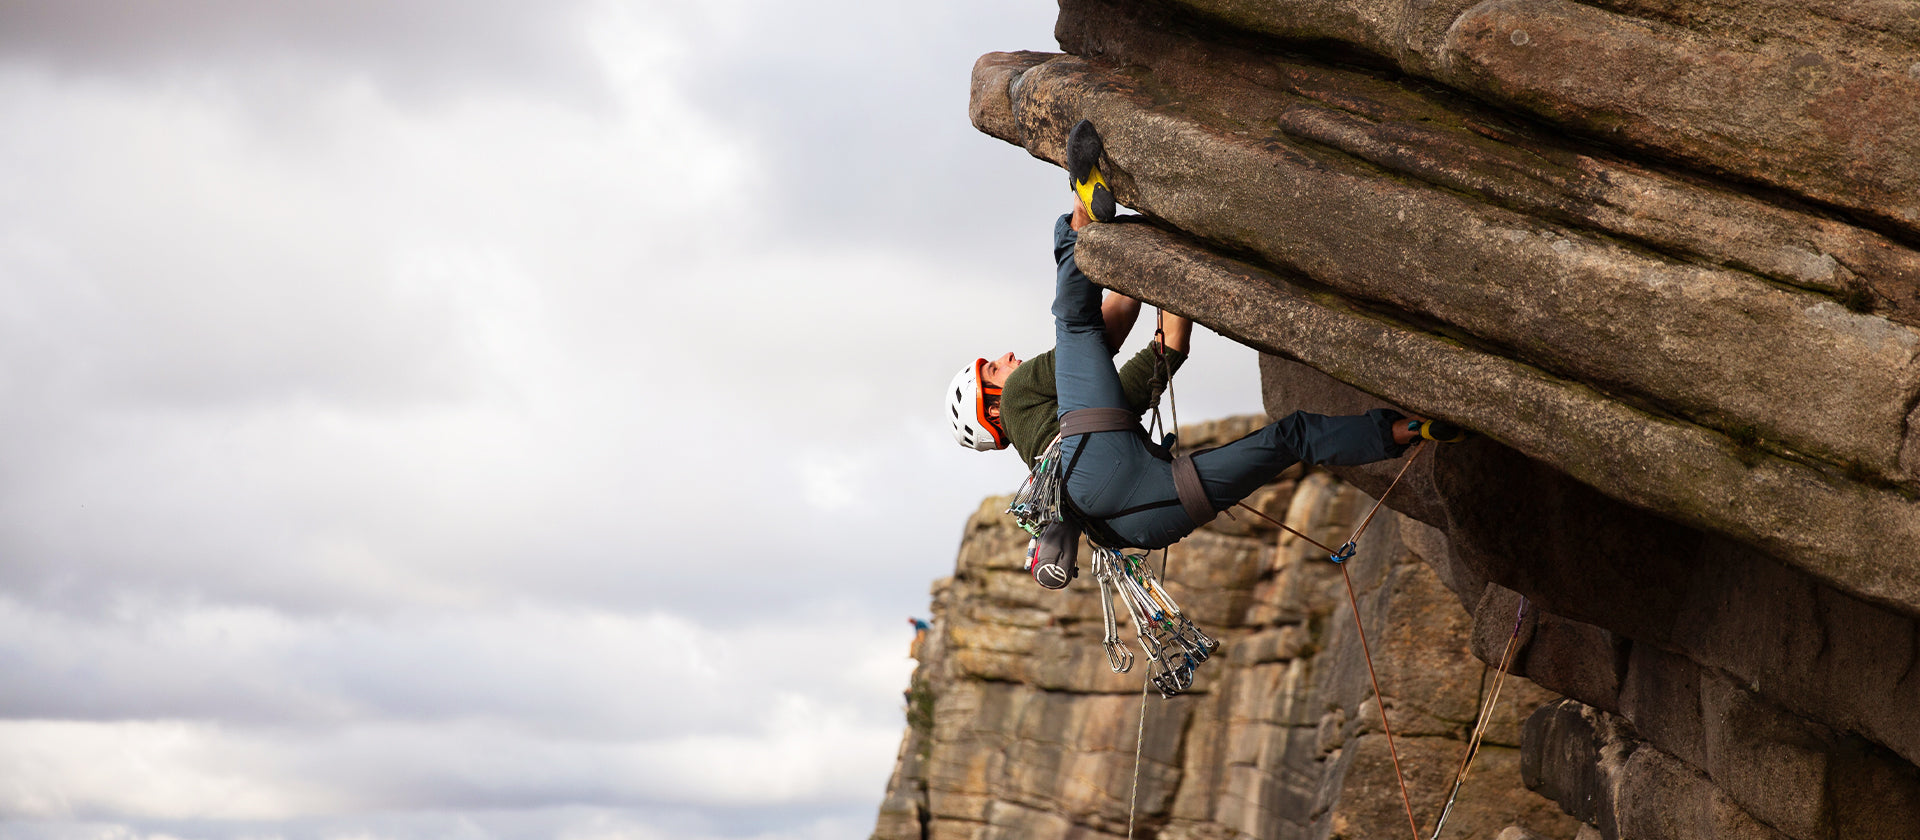 Where to Climb in the Peak District